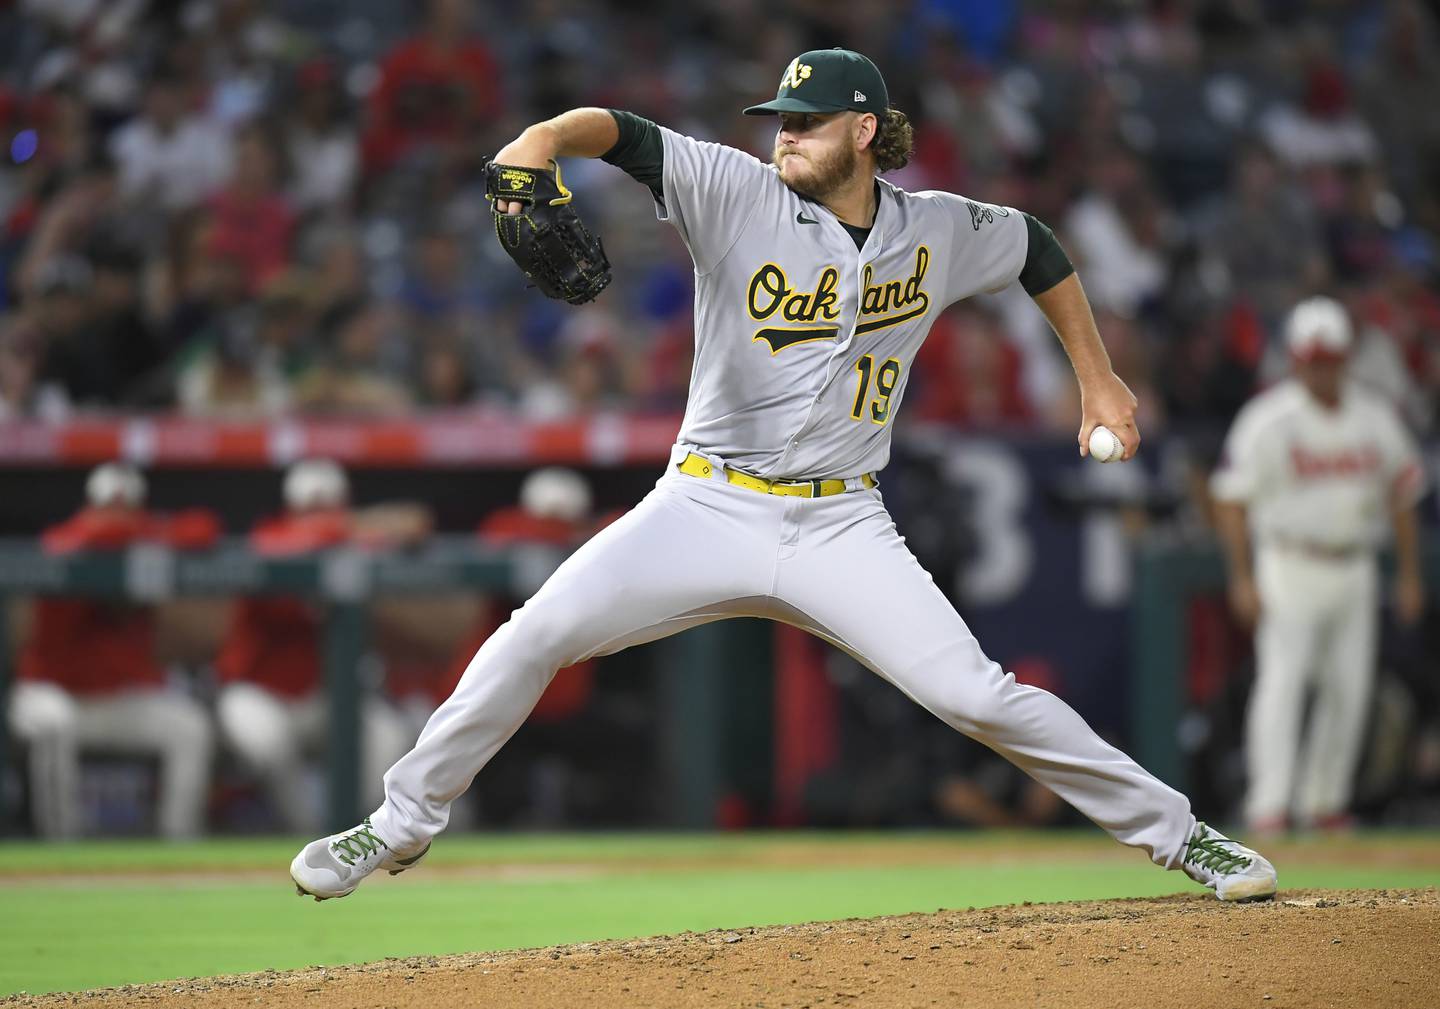 ANAHEIM, CA - AUGUST 02: Cole Irvin #19 of the Oakland Athletics pitches against the Oakland Athletics in the fifth inning at Angel Stadium of Anaheim on August 2, 2022 in Anaheim, California.